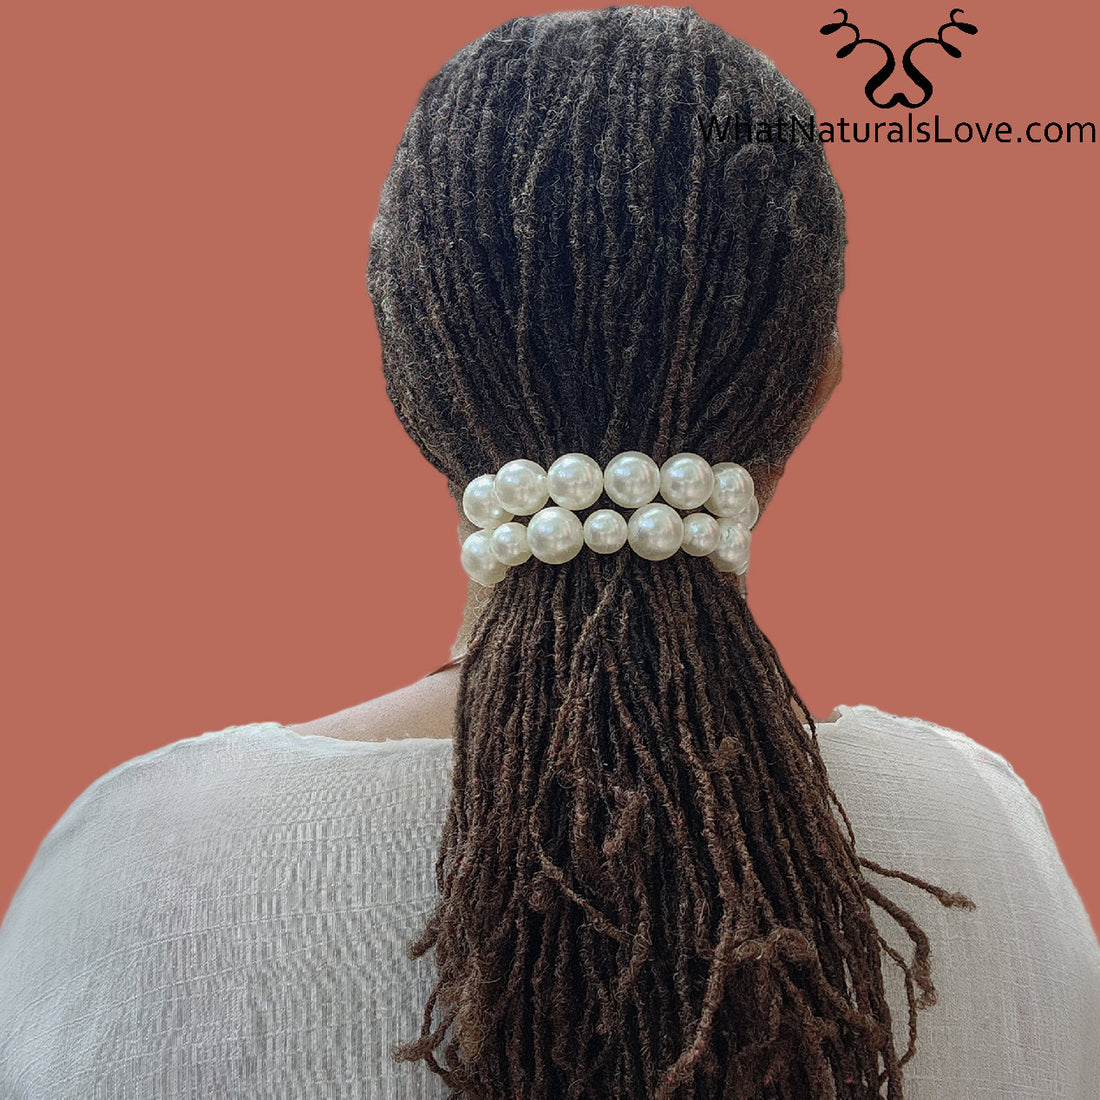 Pearled scrunchi for Braids, Locs and Natural Hair